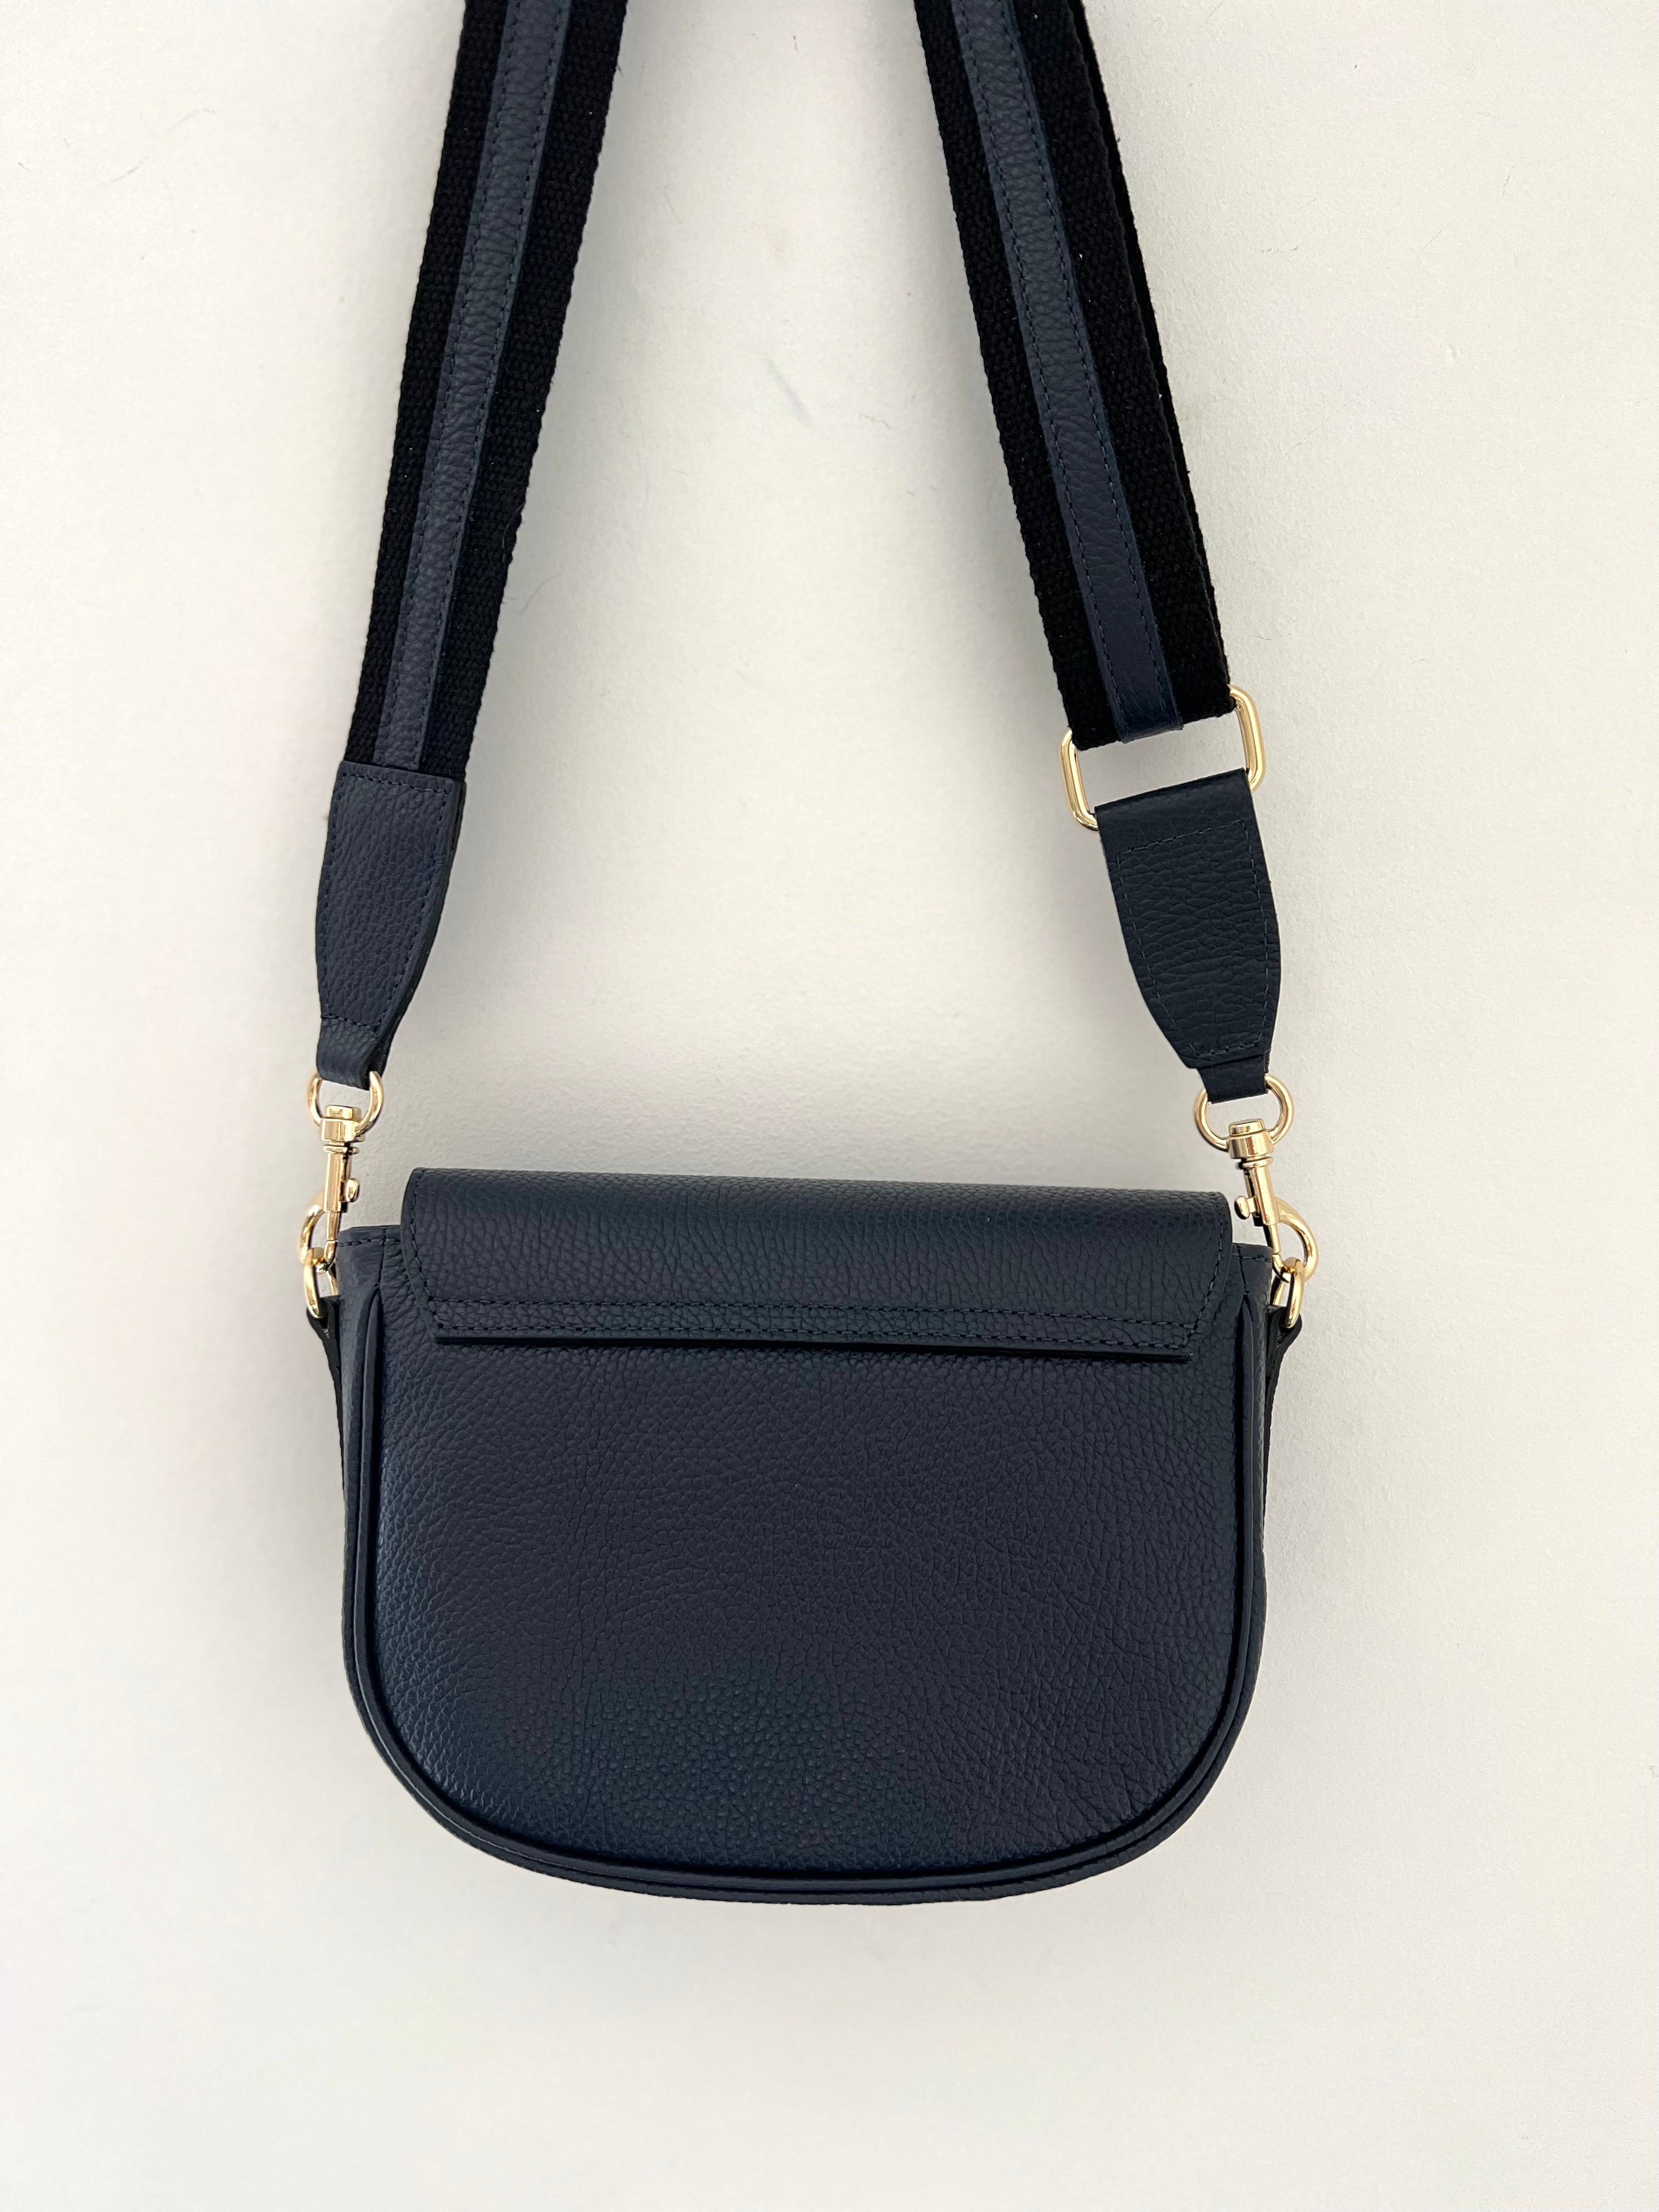 Pebble Leather Crossbody Bag in Ink